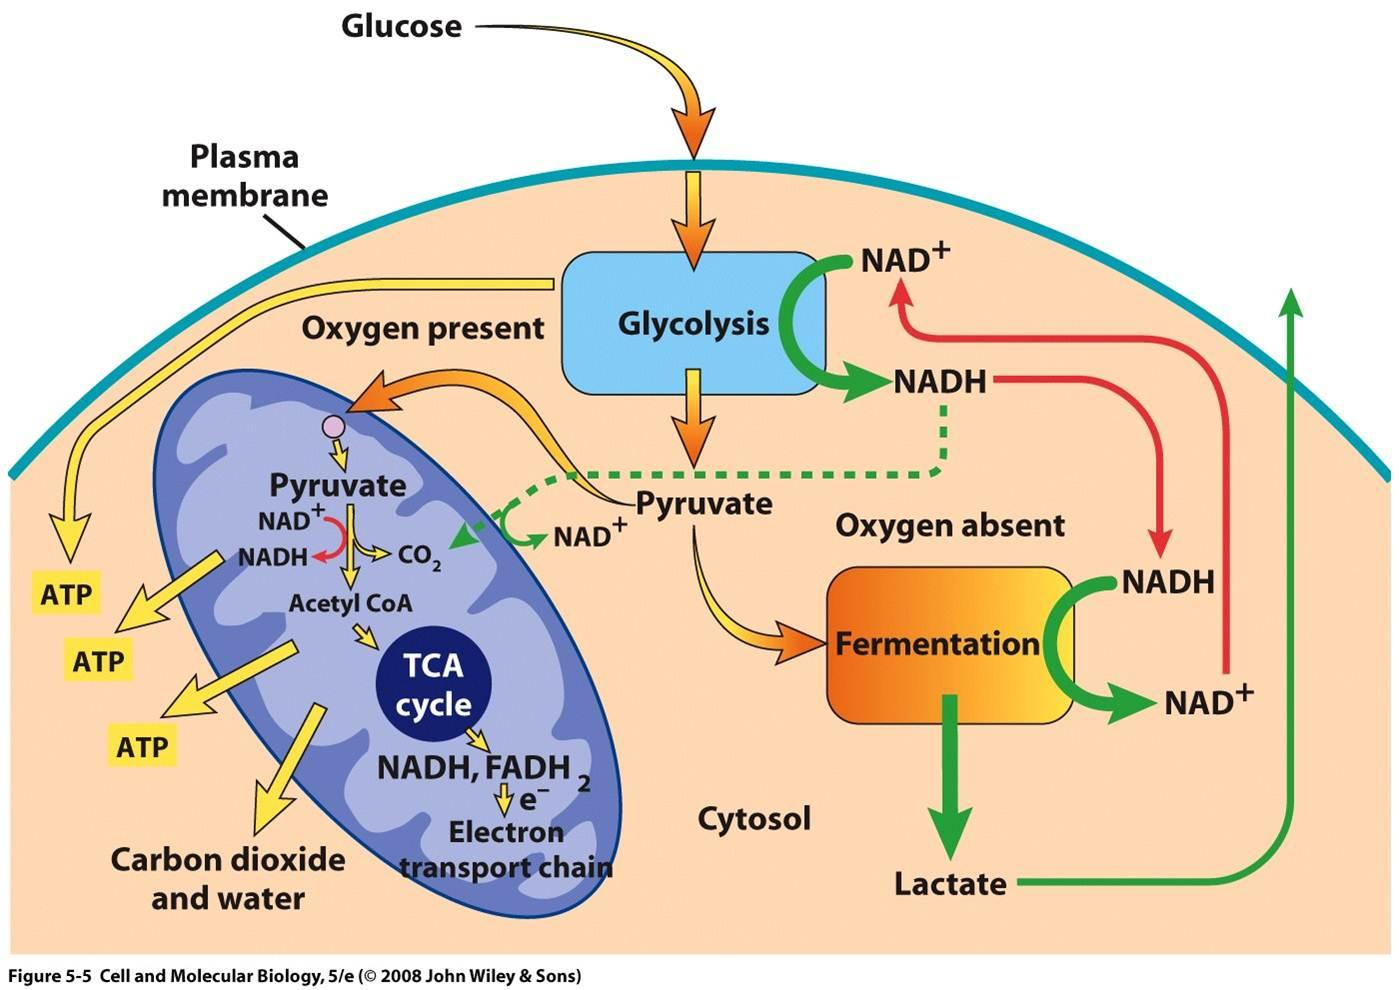 Cellular Respiration Diagram Biochemistry How Does The Body Switch Between Aerobic And